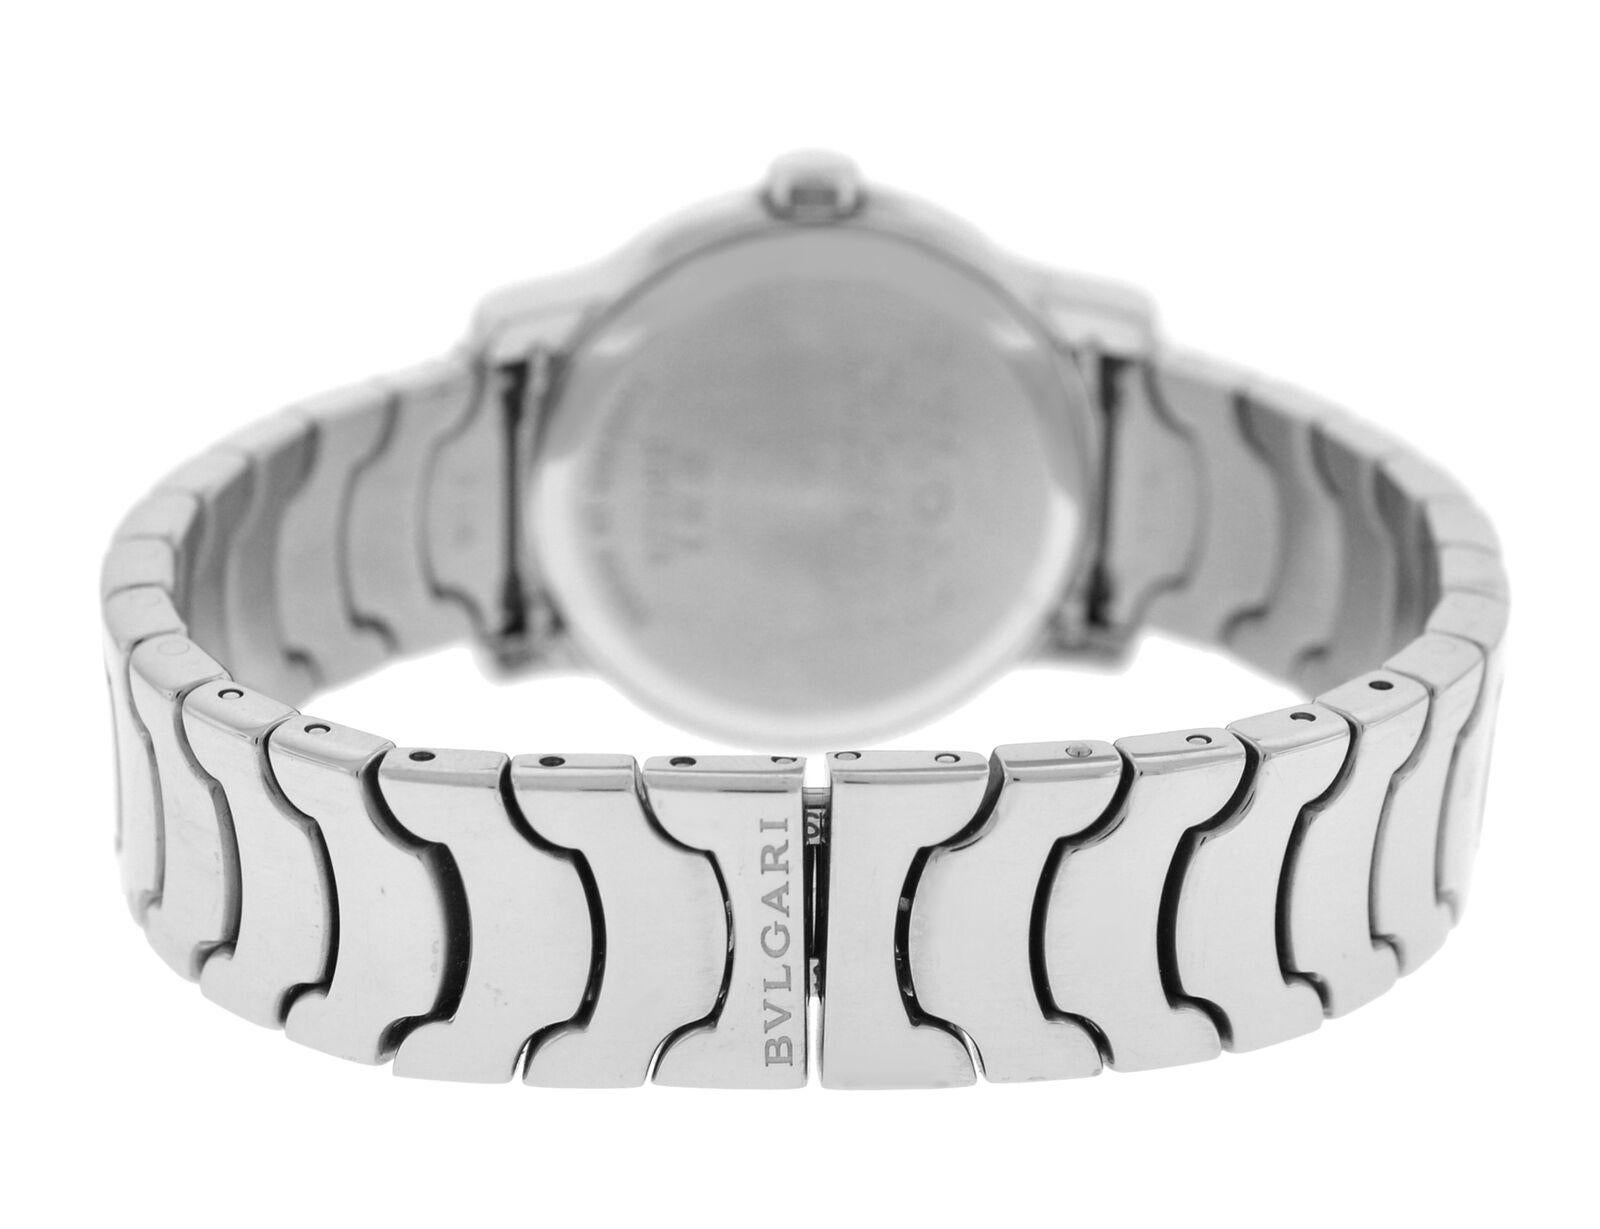 Ladies Bvlgari Solotempo ST29S Stainless Steel Date Quartz Watch For Sale 1